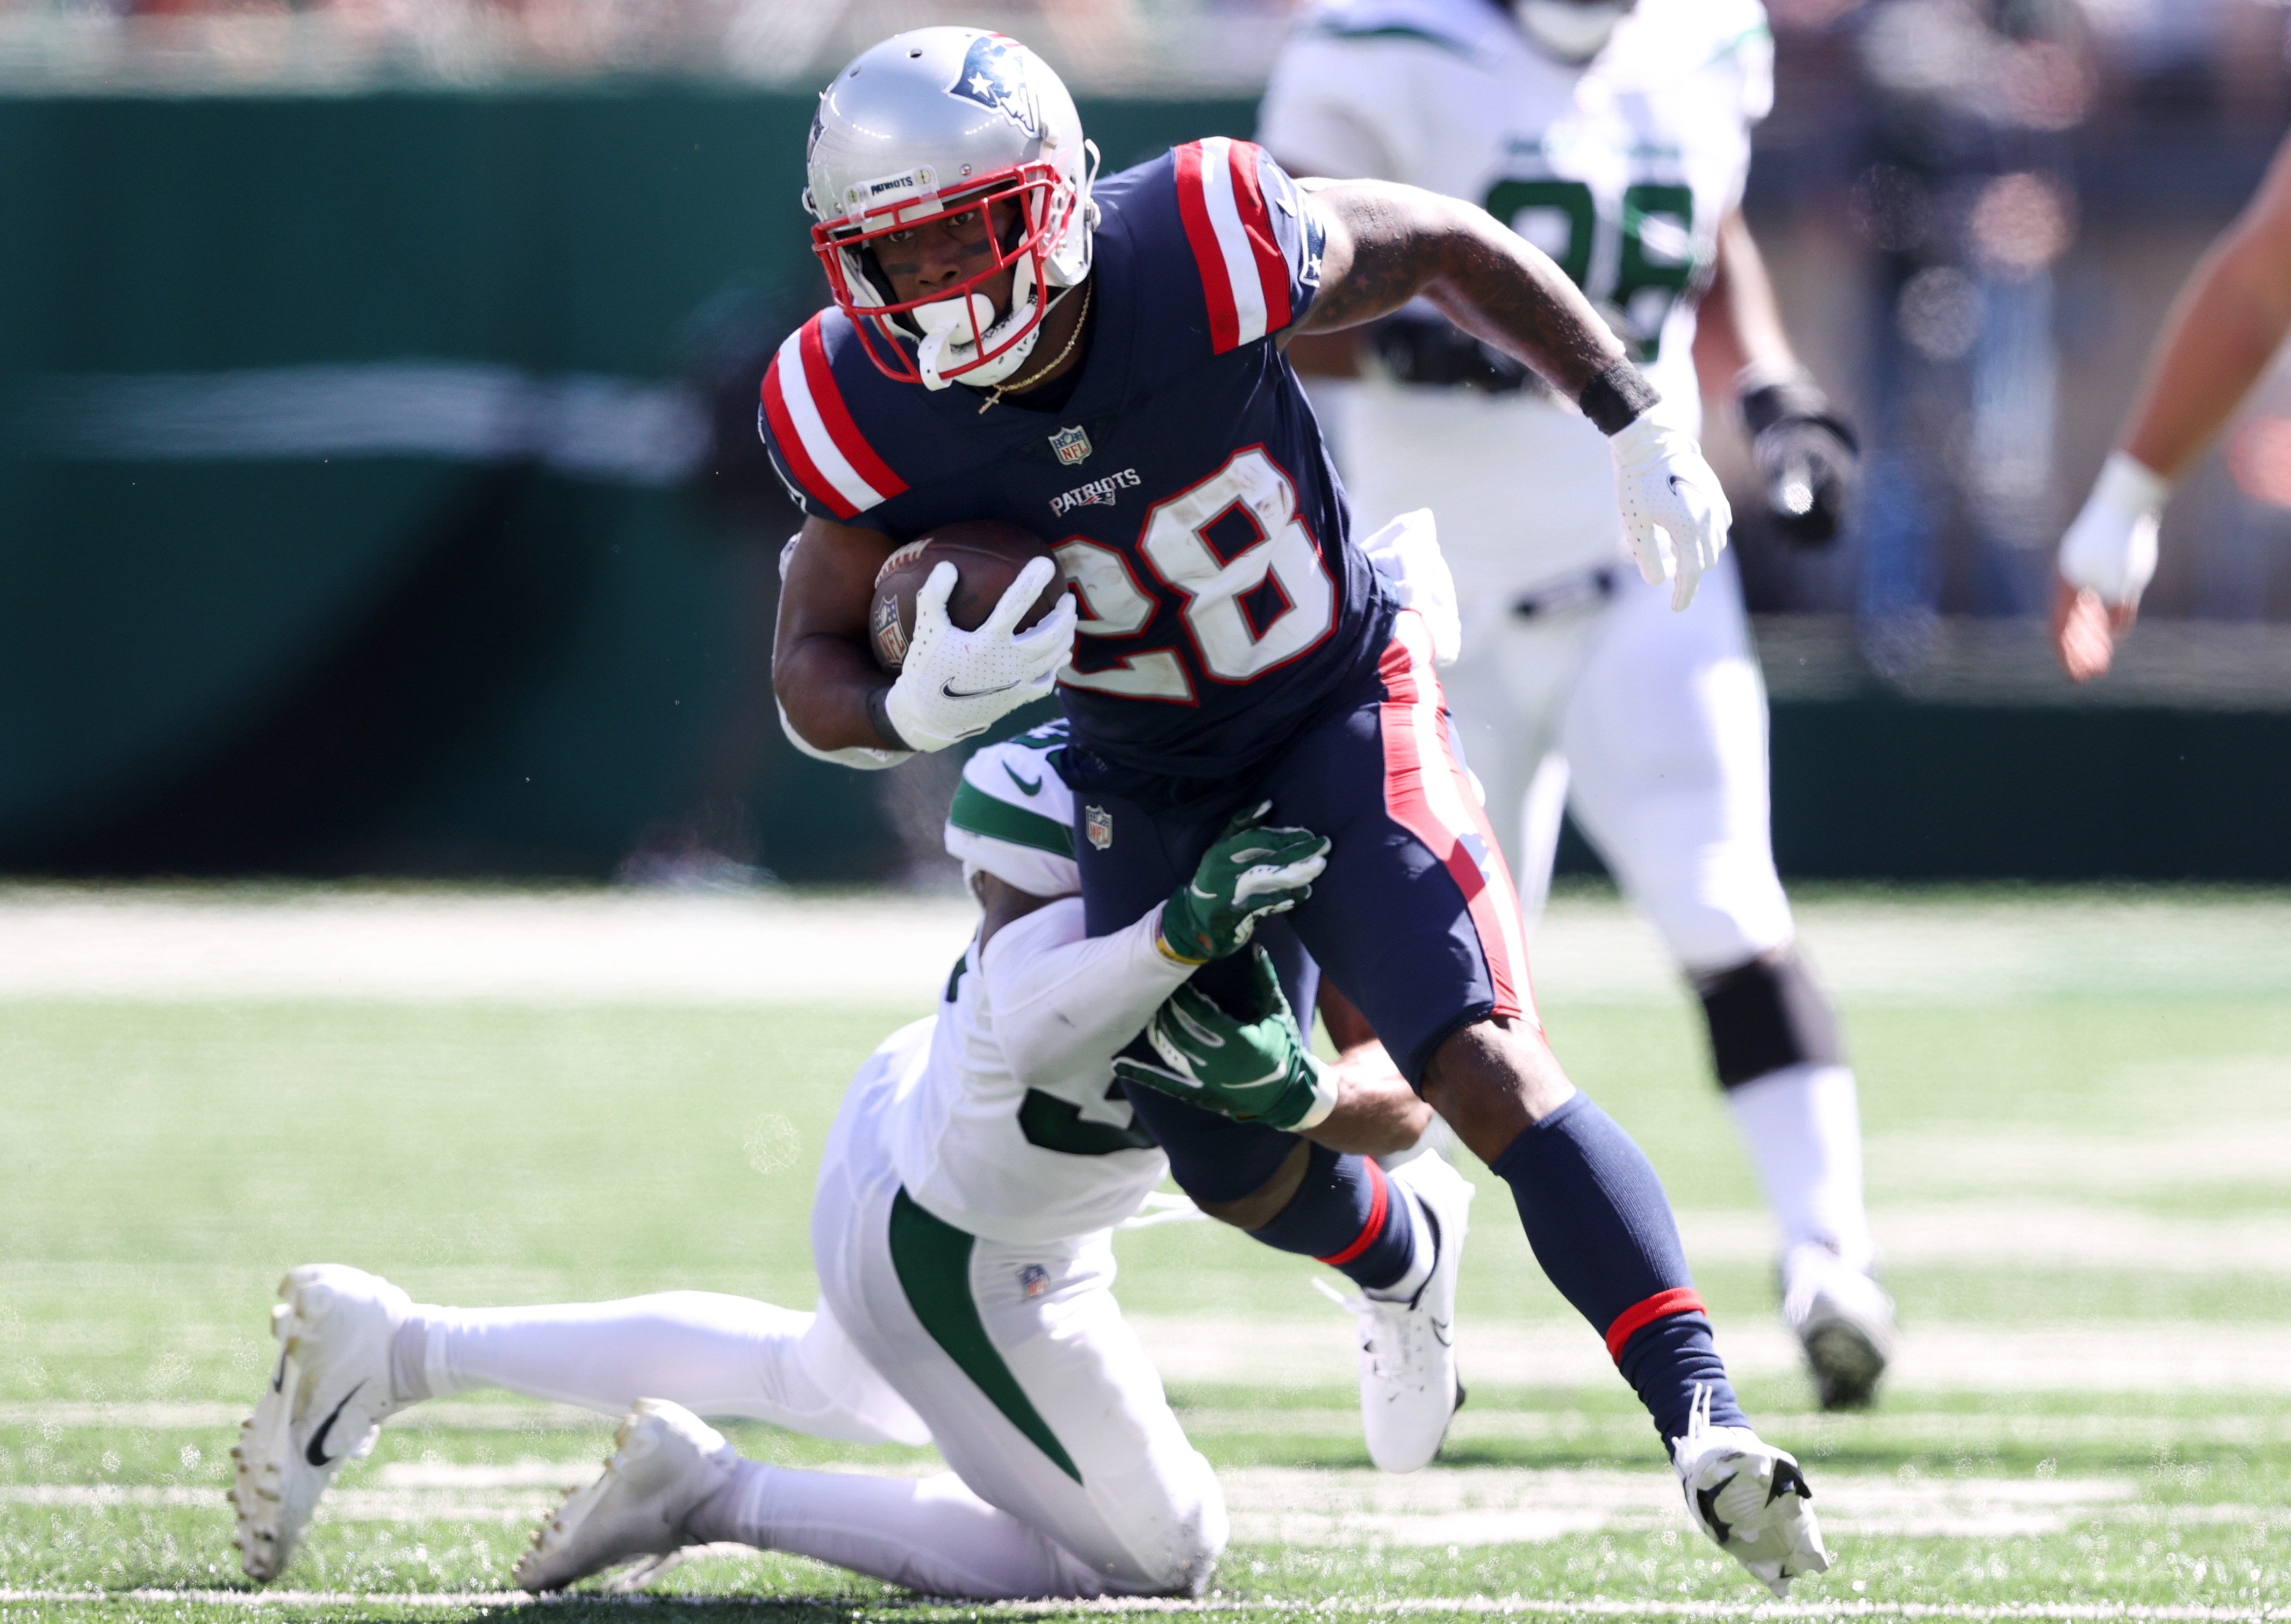 Running back James White of the New England Patriots runs the ball.